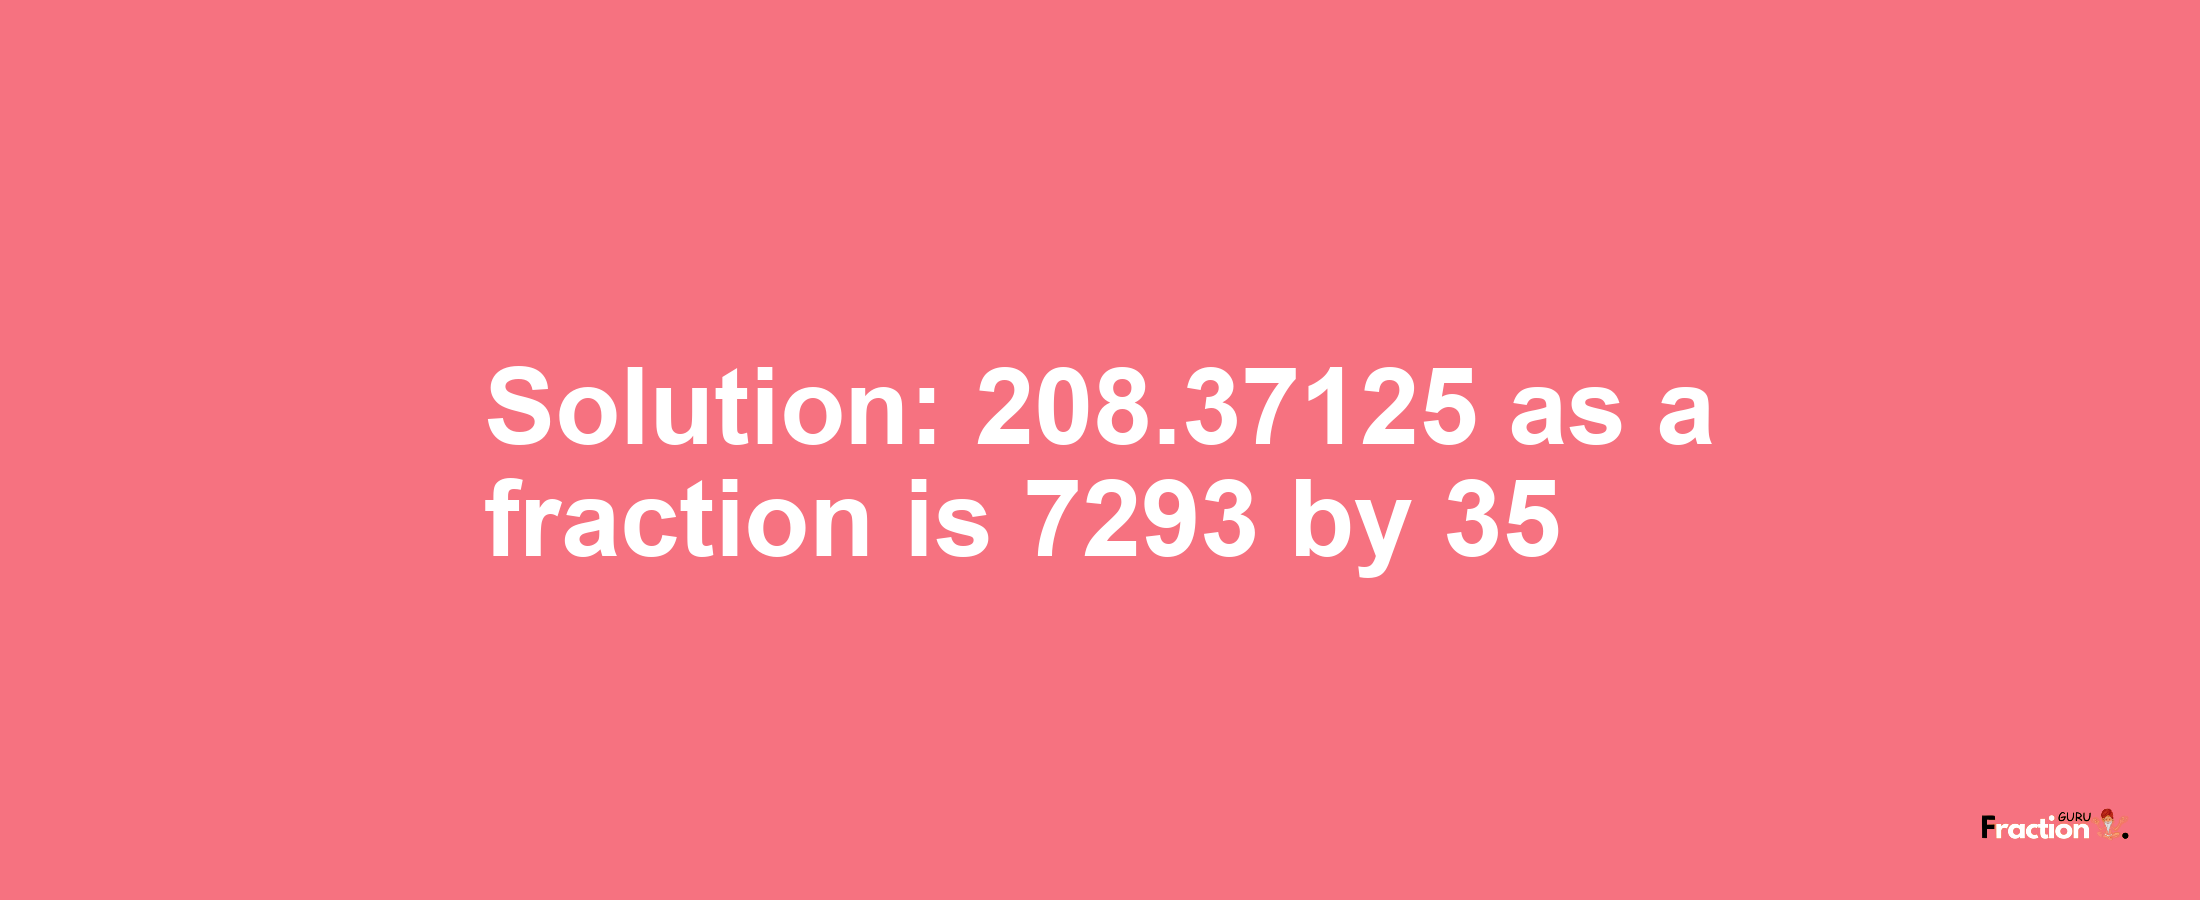 Solution:208.37125 as a fraction is 7293/35